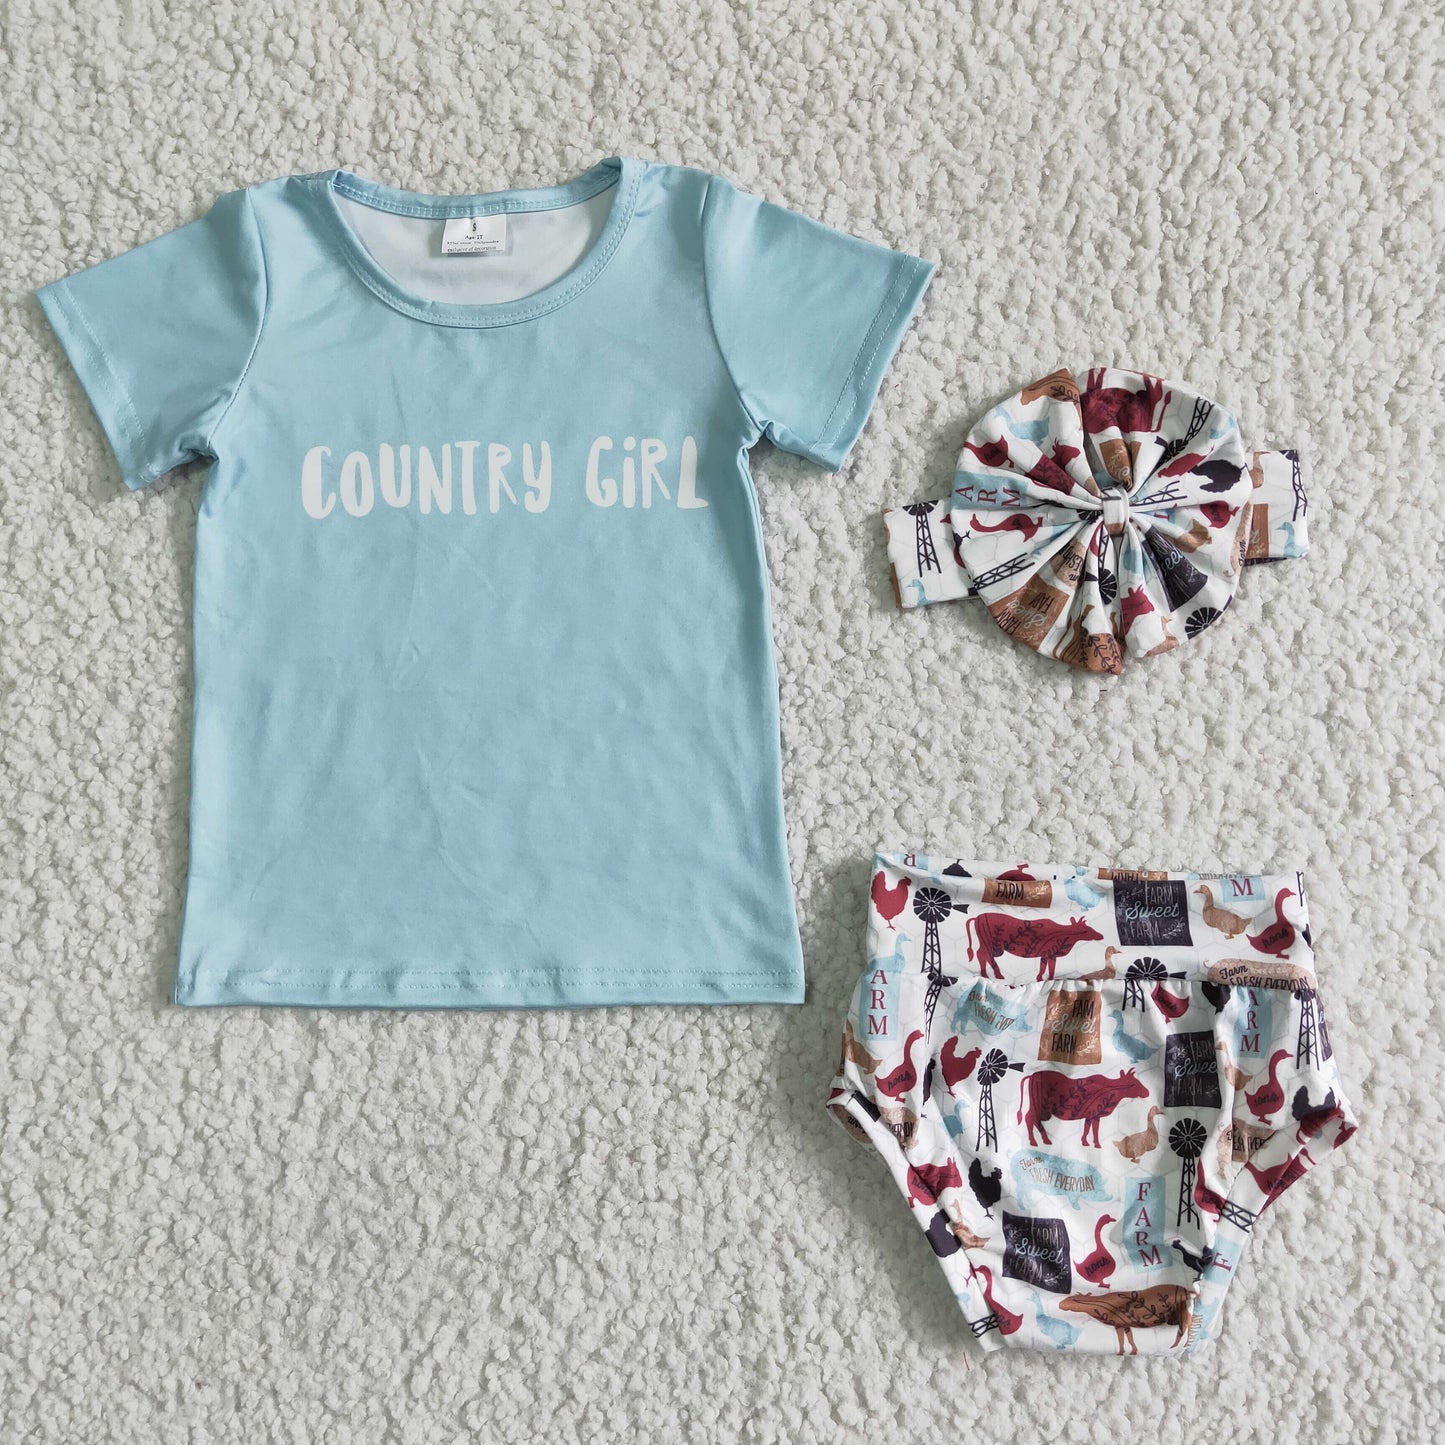 infant clothing summer bummie set for baby girl